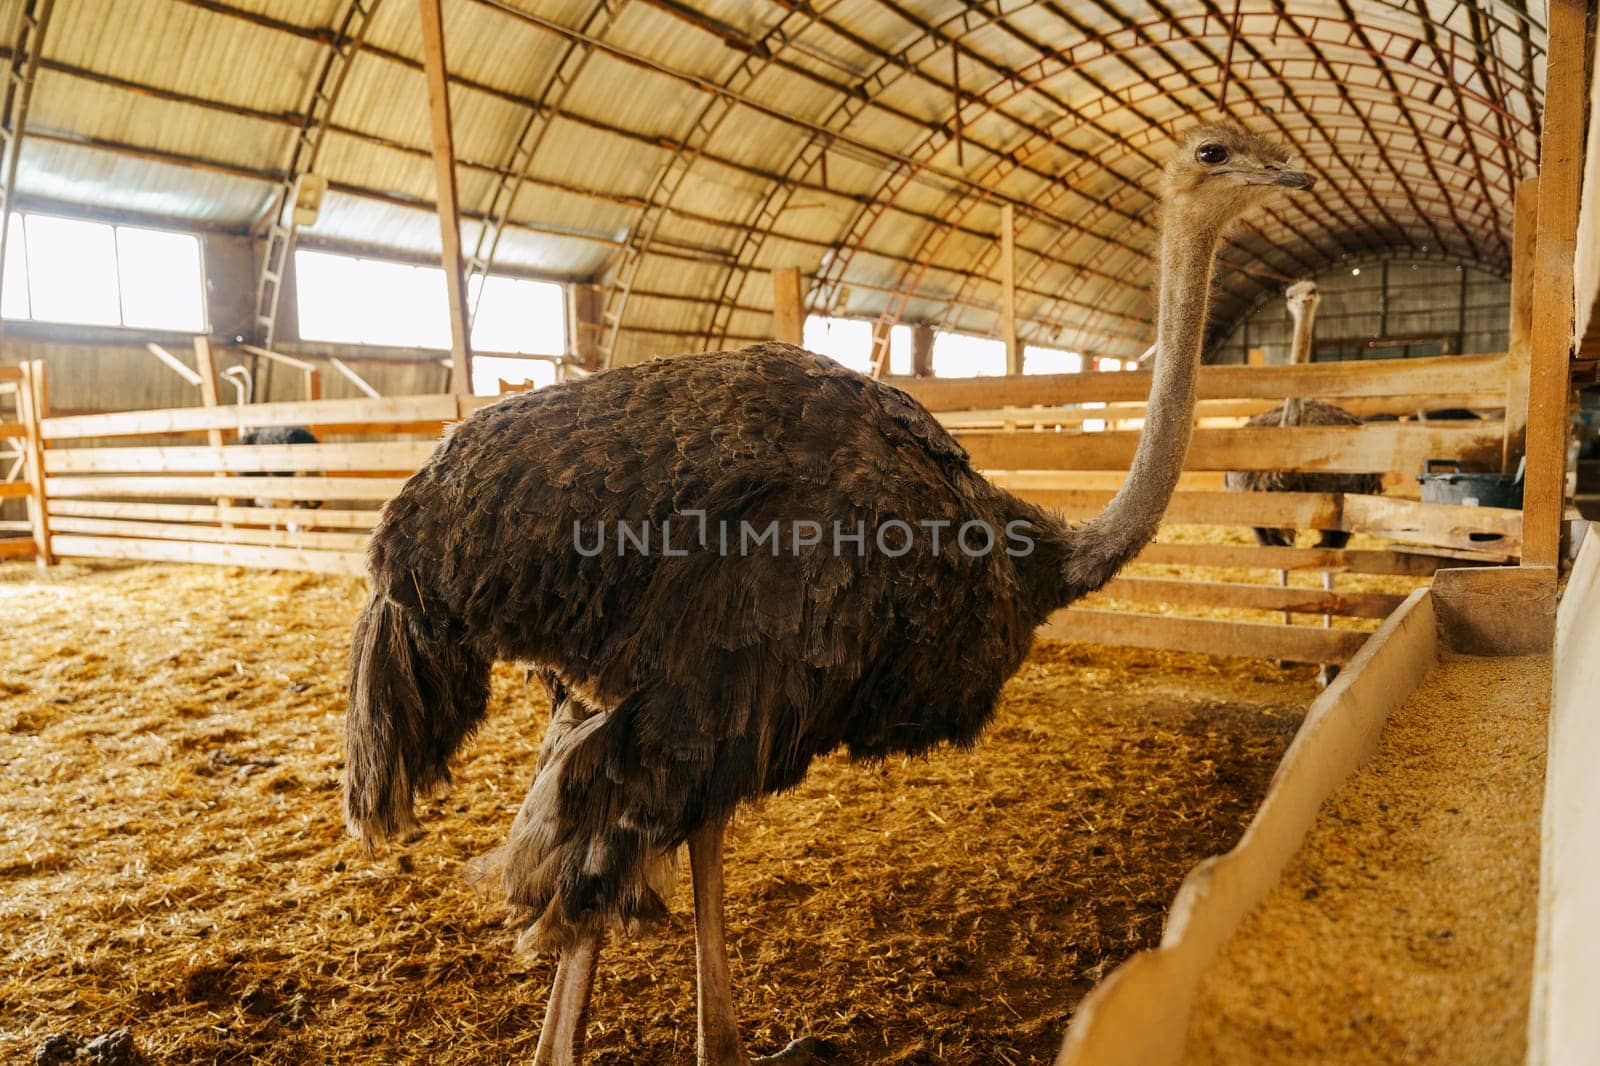 Ostrich is standing proudly in a charming barn filled with golden hay bales.